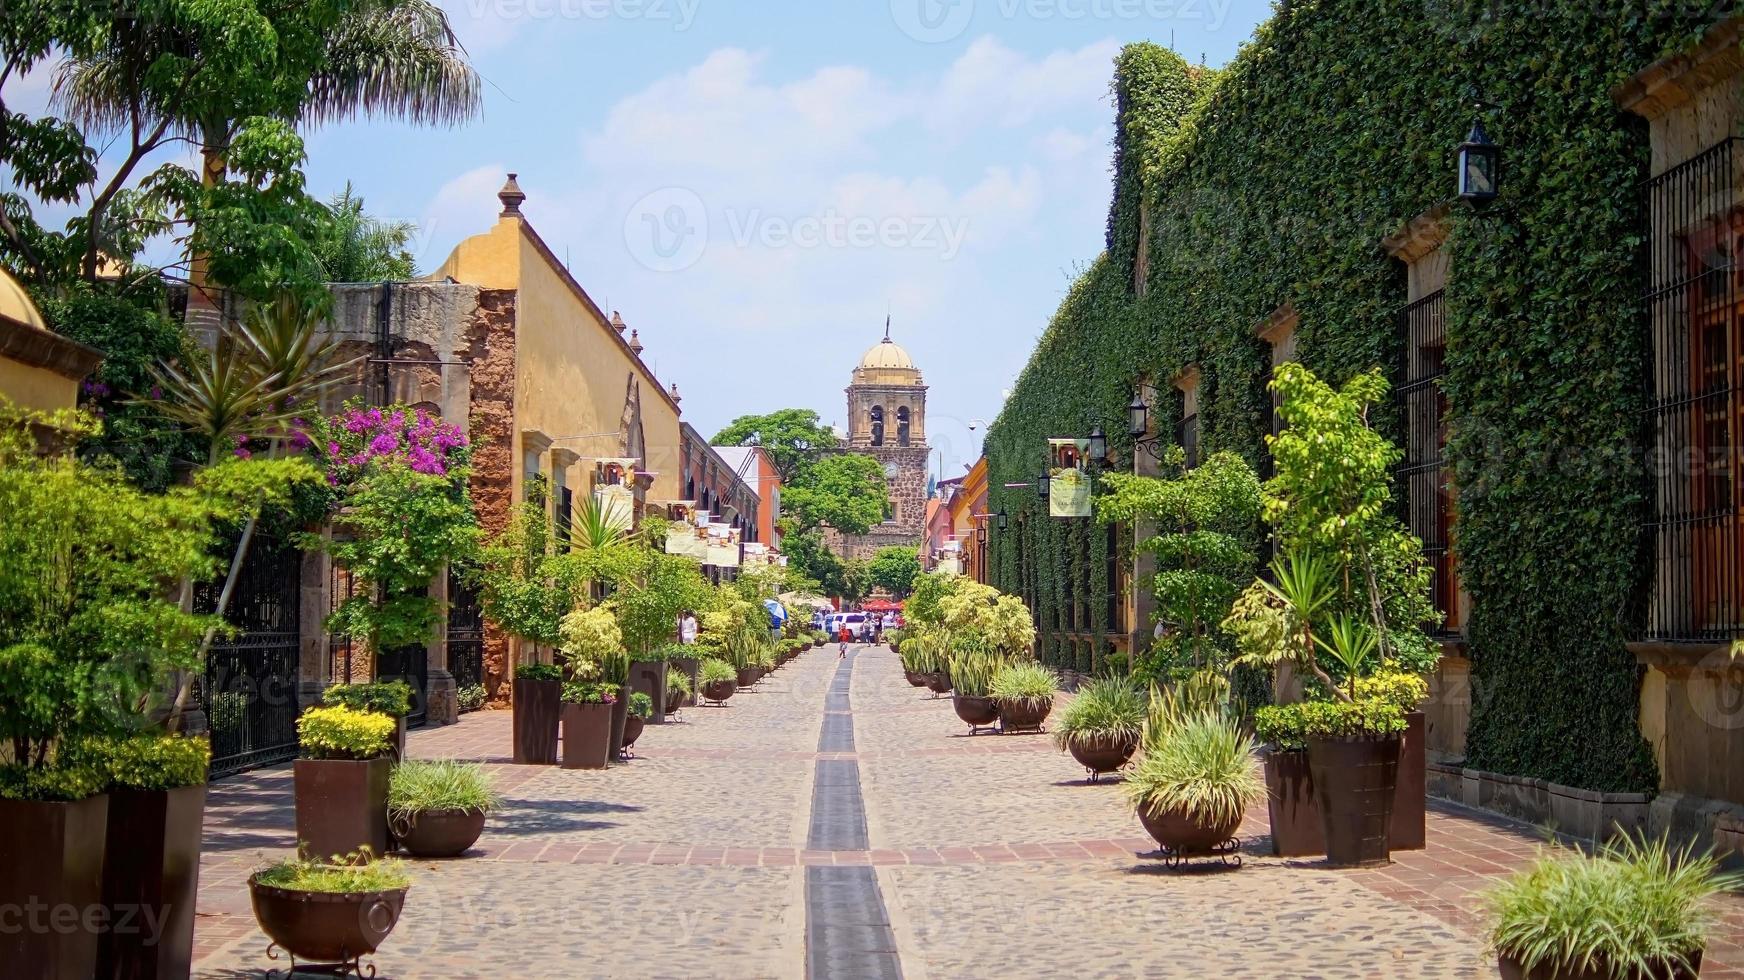 stone path with flower pots on the sides, colonial mansions with vines all along the wall, in the background a church photo